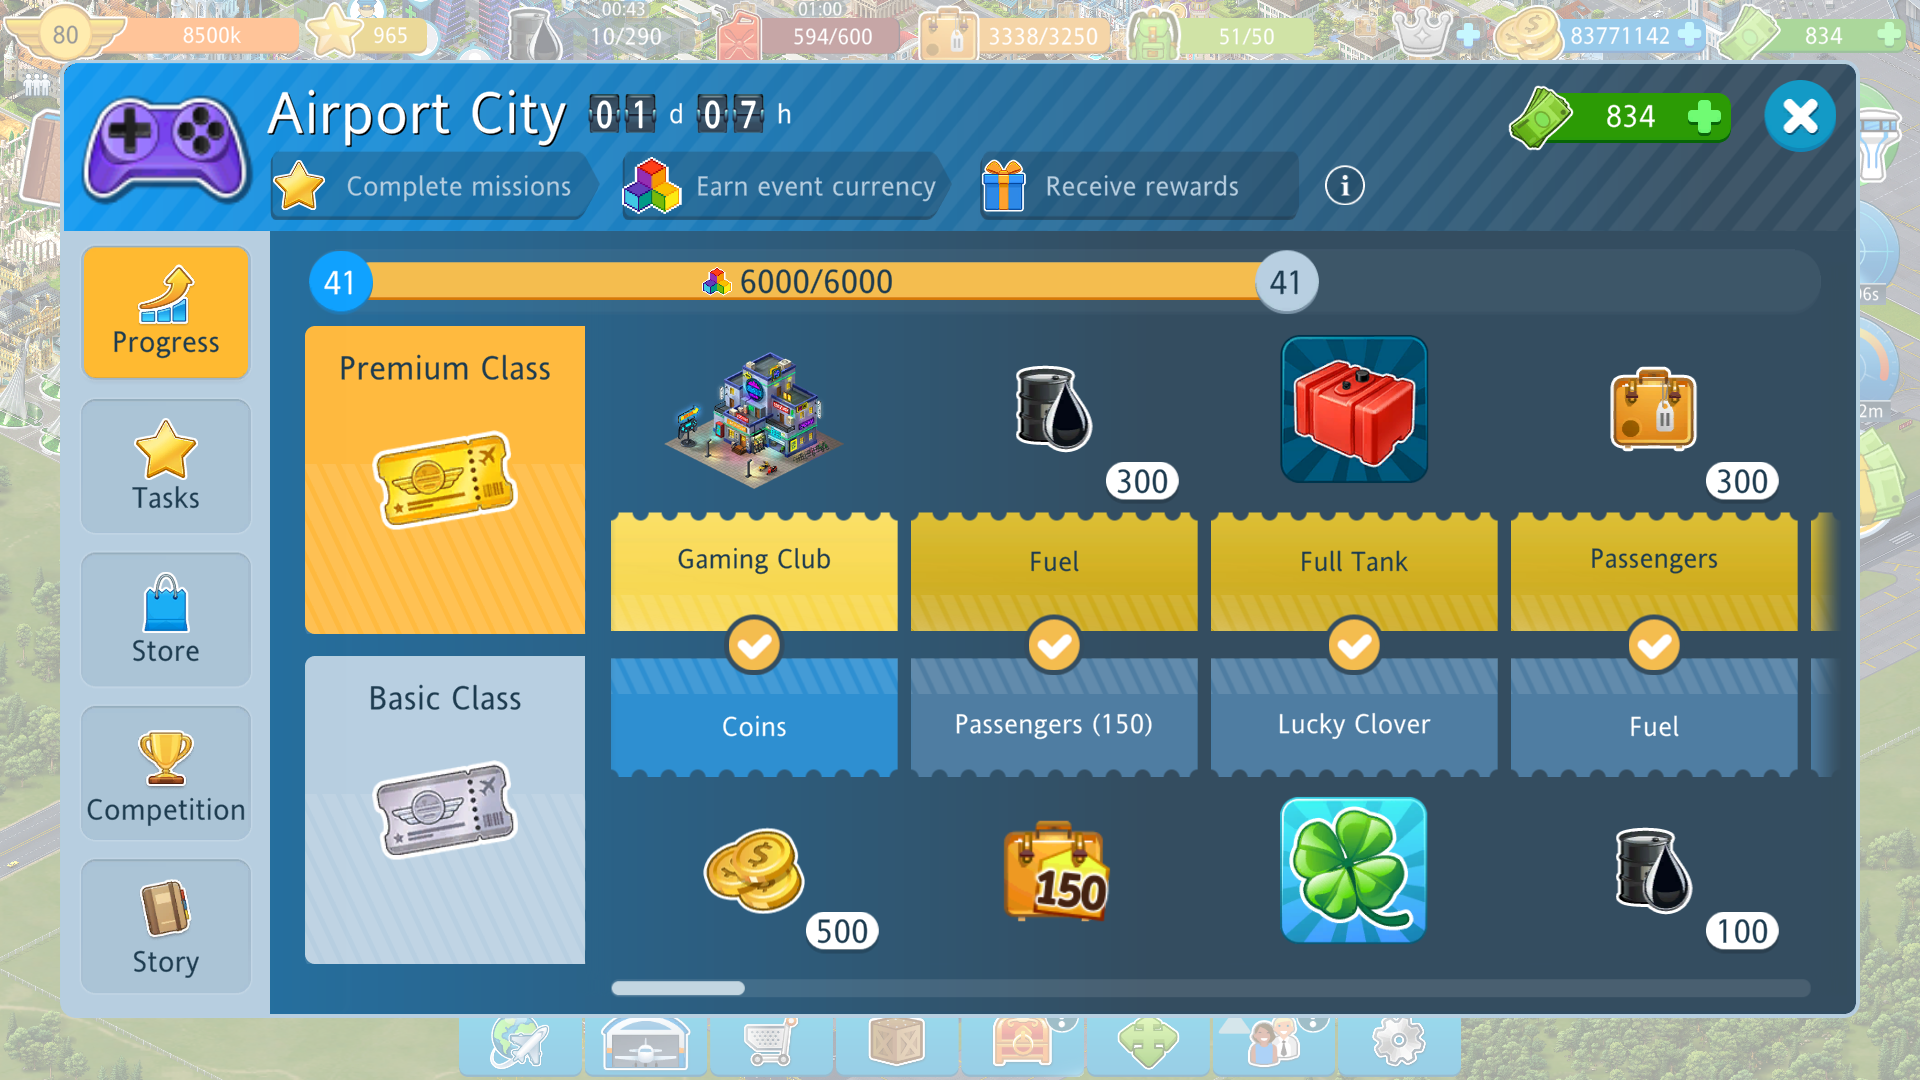 AirportCity2023_20ghozgdl_success_tasks.png